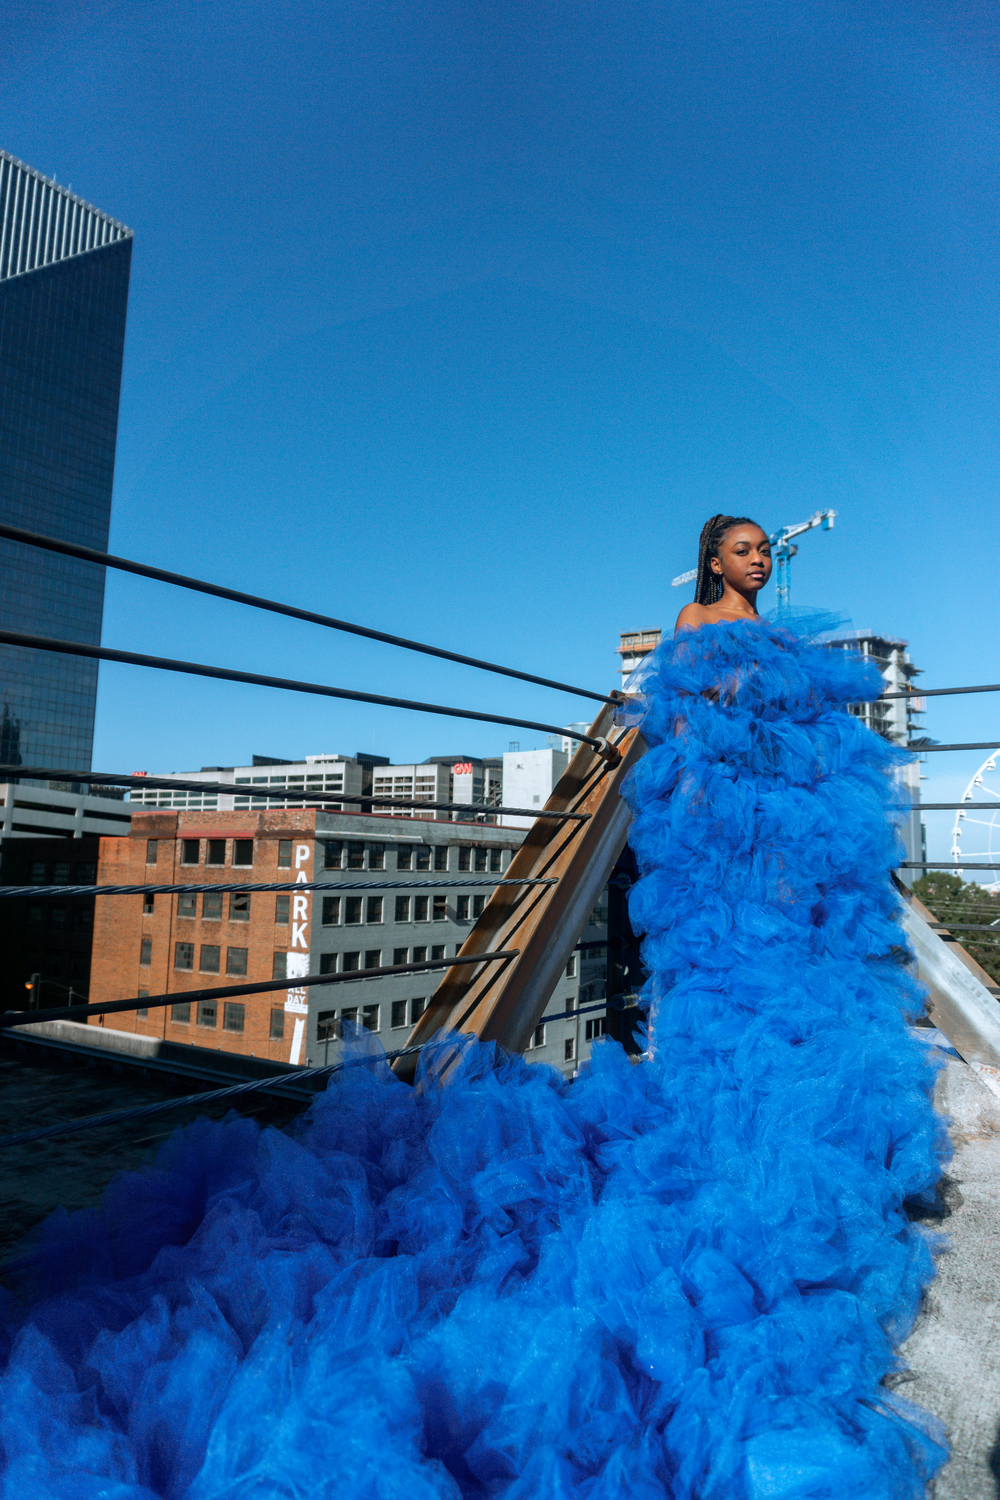 INTERVIEW: Amari Moneé about the essence of couture